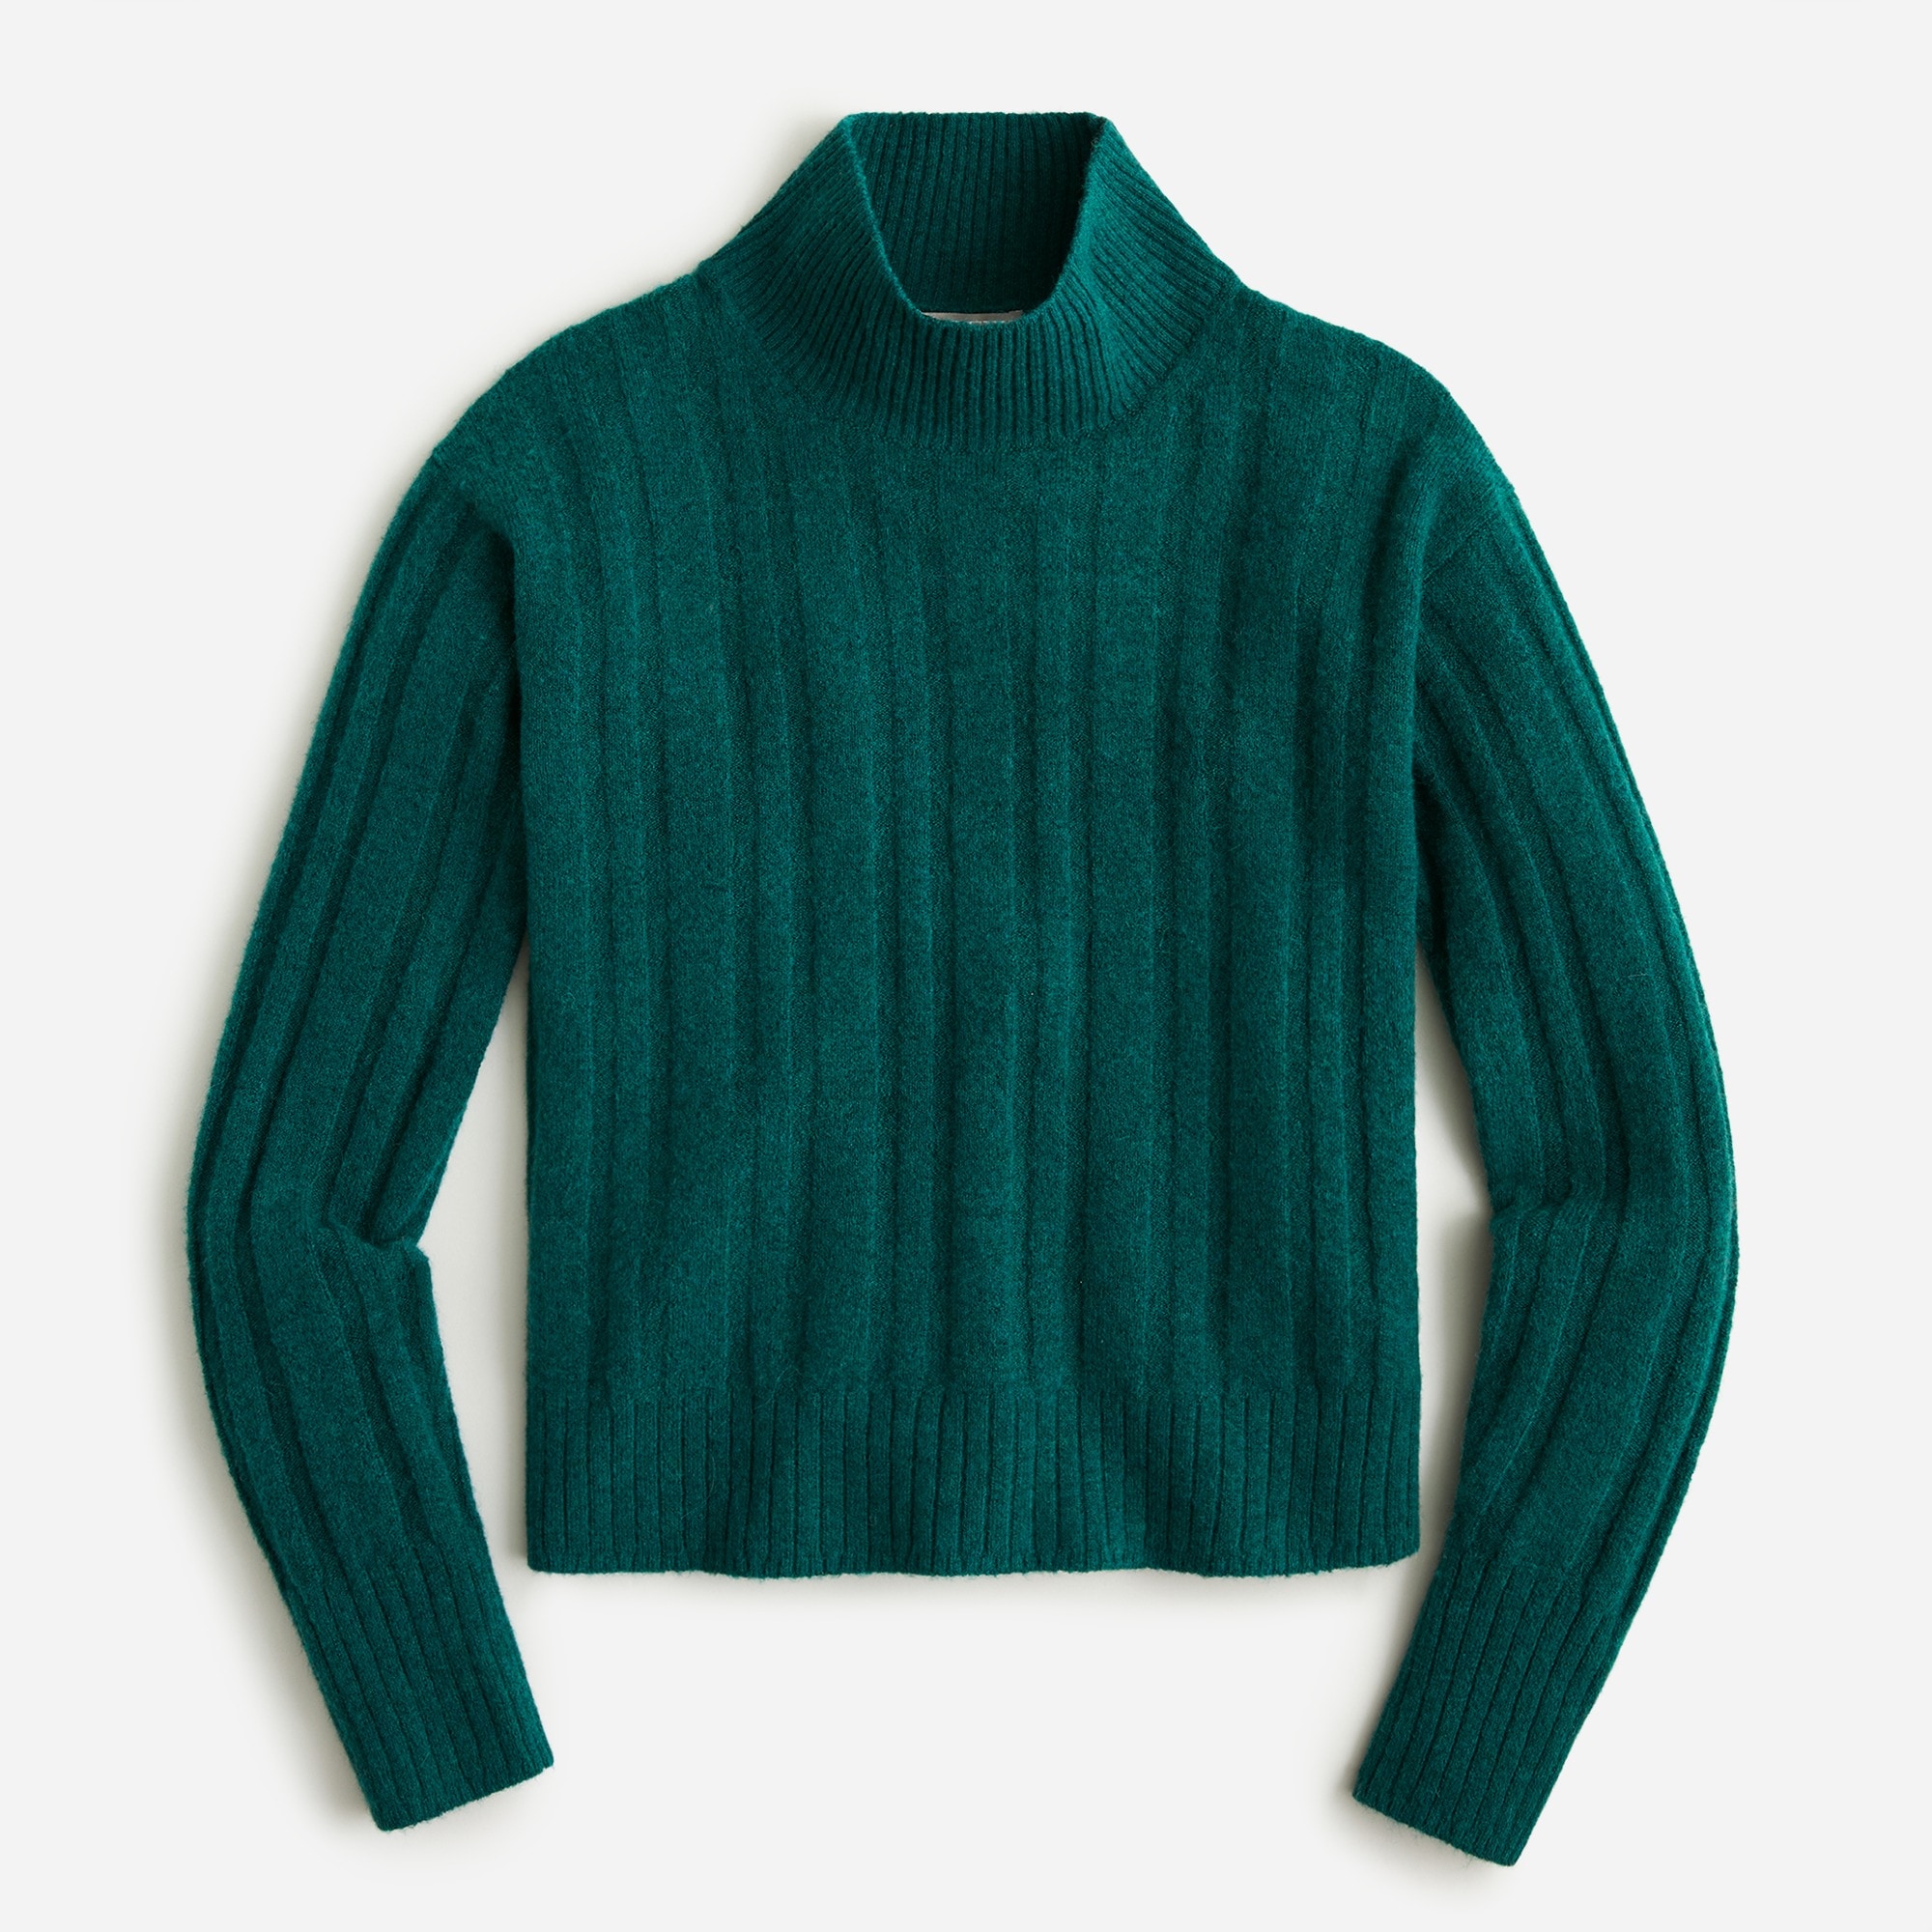 J.Crew: Ribbed Mockneck Sweater In Supersoft Yarn For Women